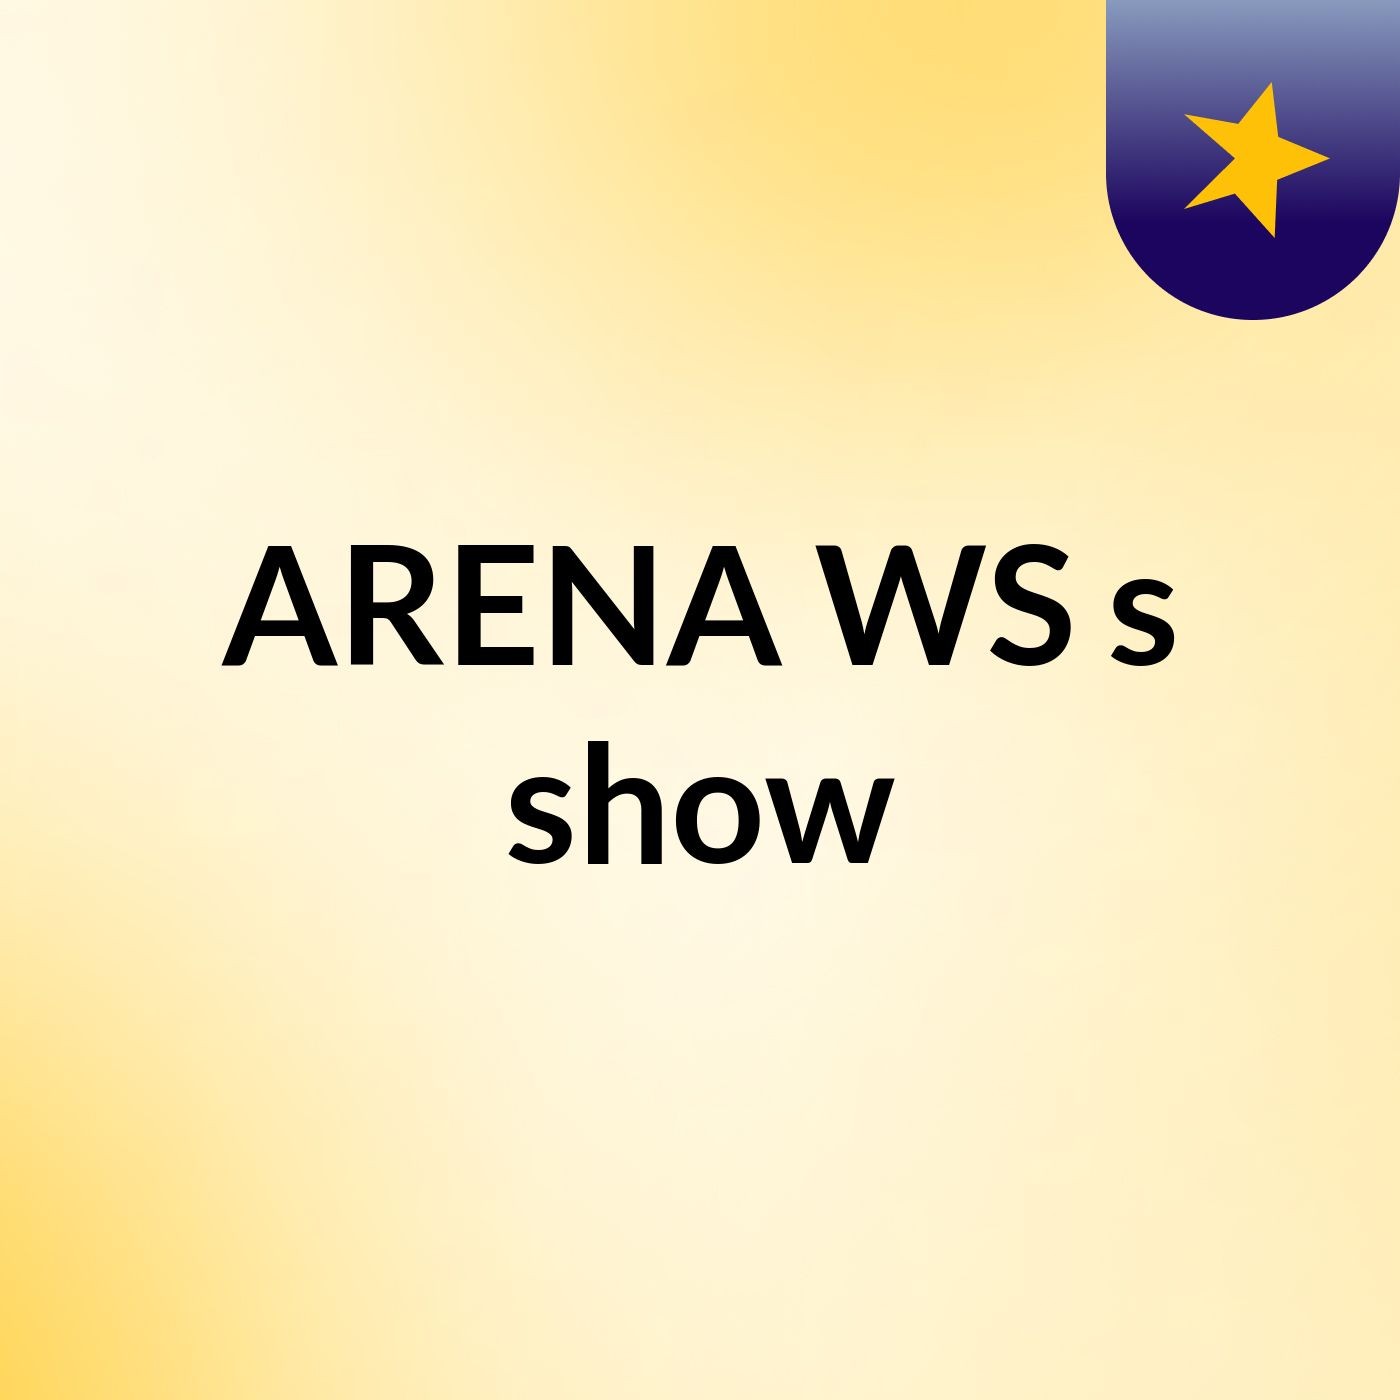 ARENA WS's show